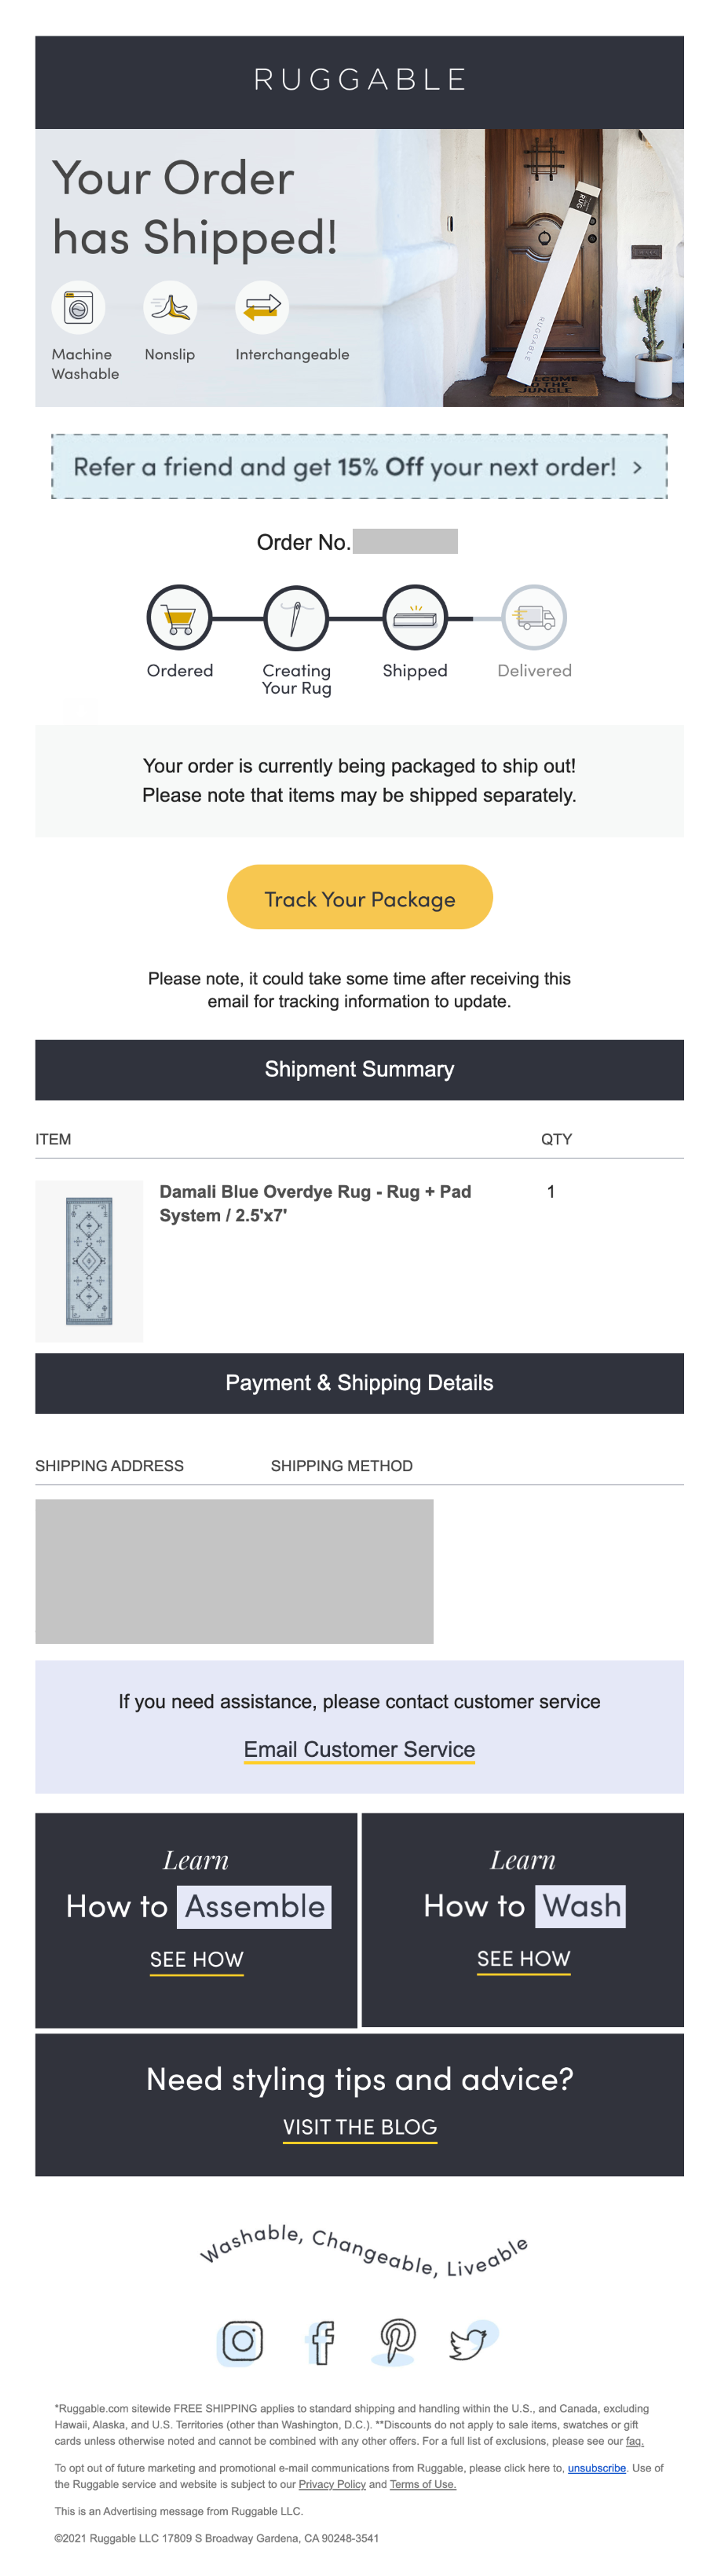 Ruggable Shipment Confirmation Email Template screenshot